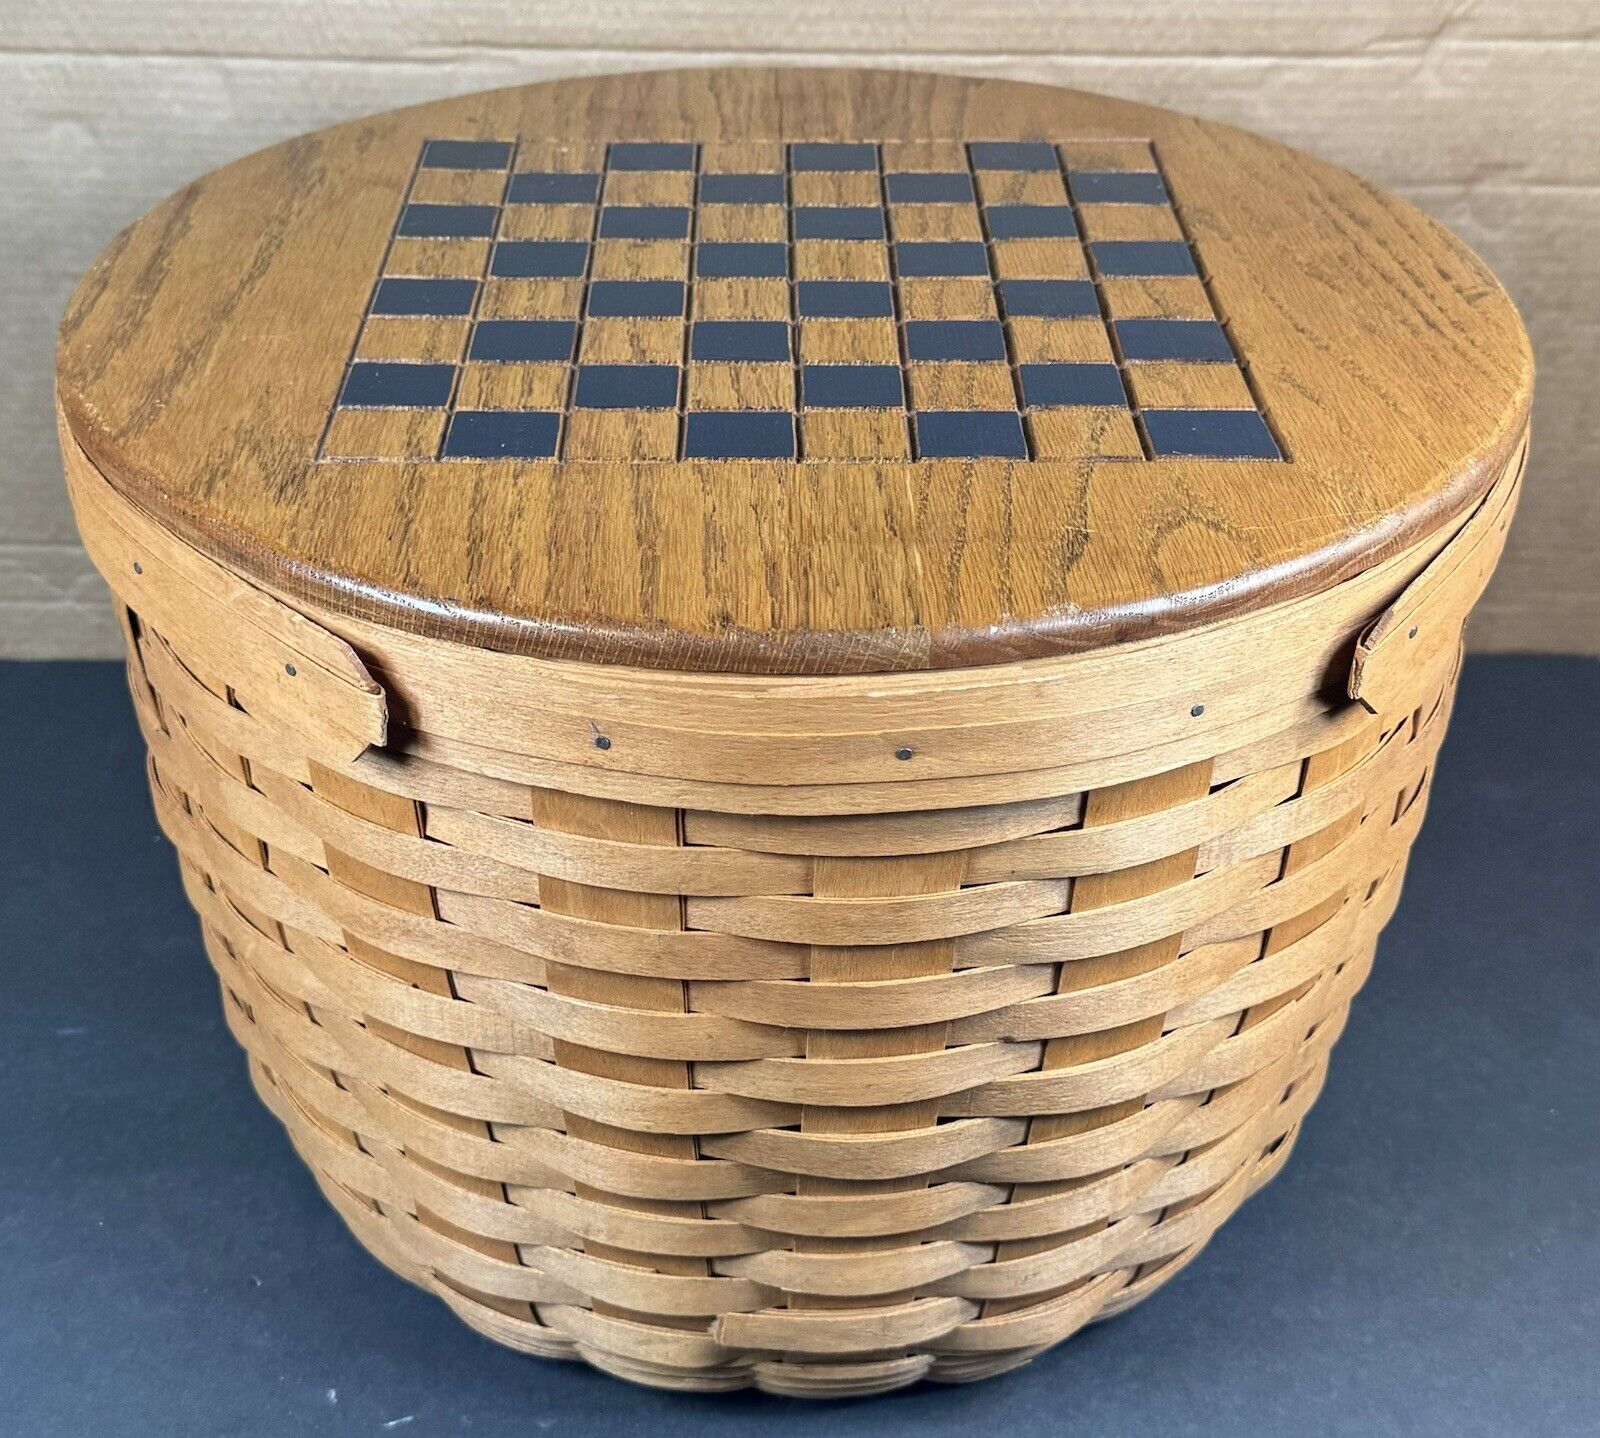 LONGABERGER Rare Large Handmade Wicker Storage Basket With Checkers Game On Top